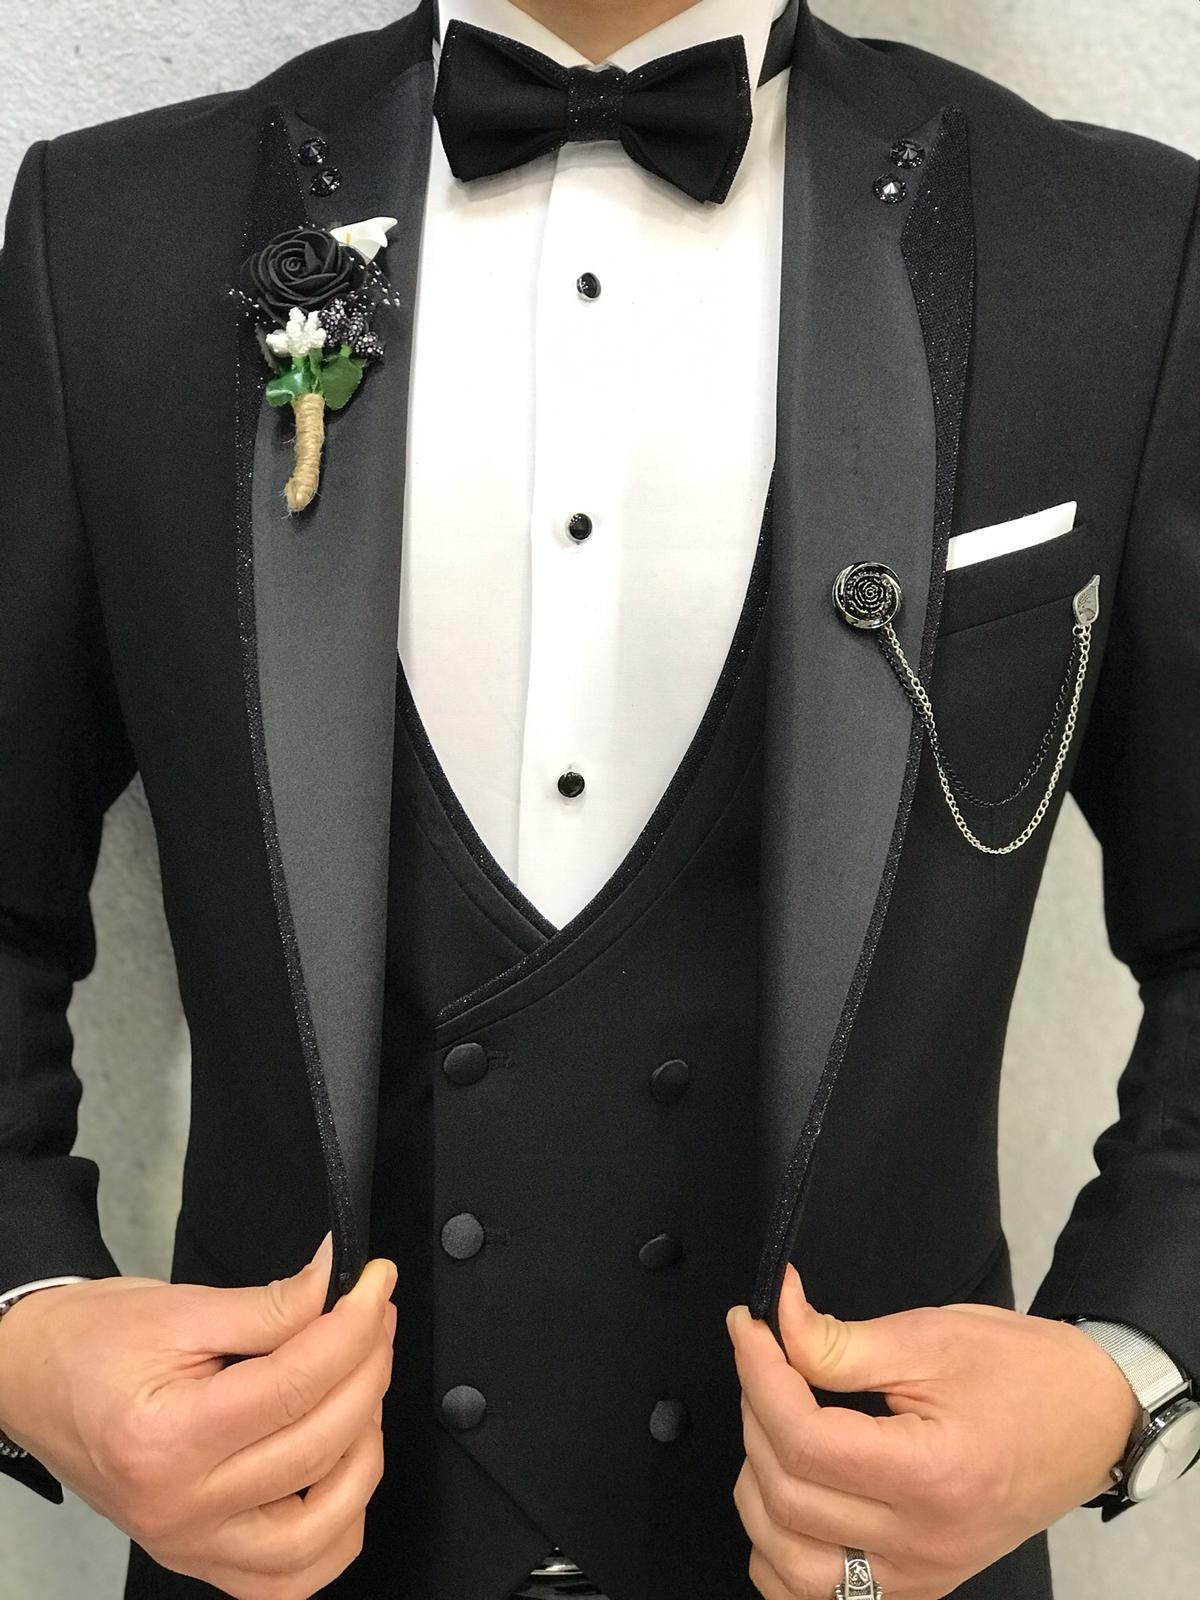 Buy Black Slim Fit Tuxedo by GentWith.com with Free Shipping